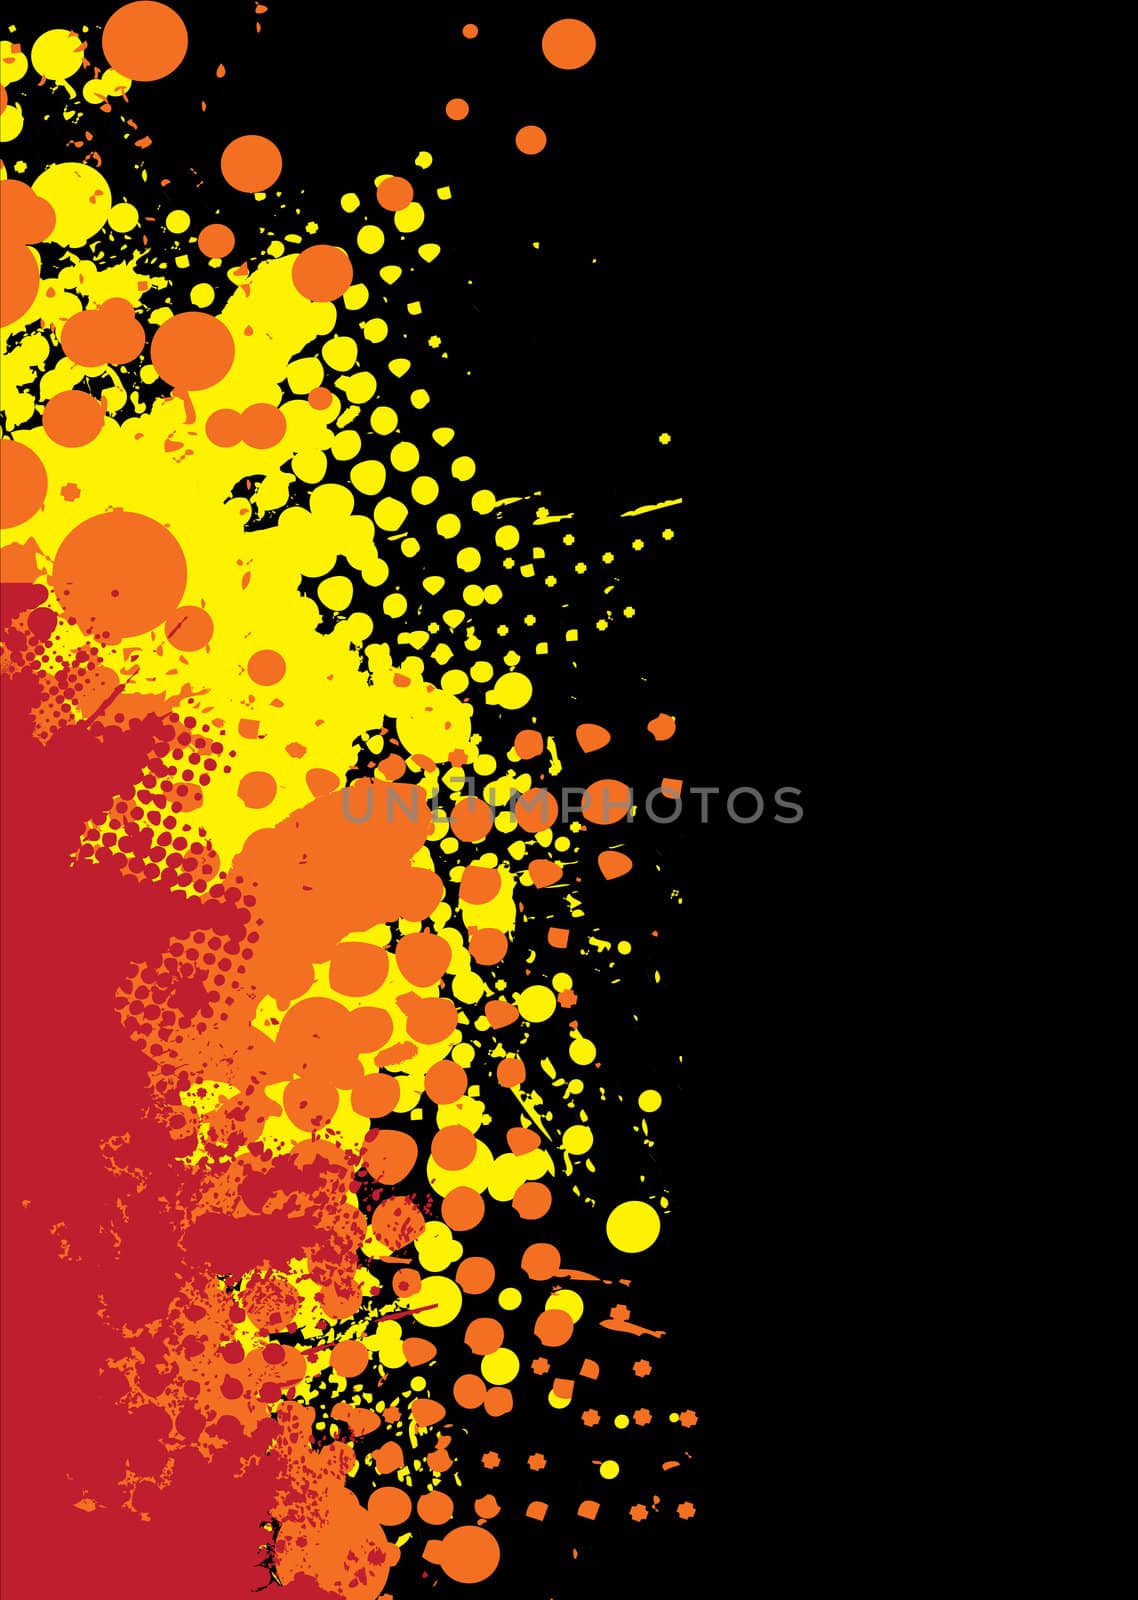 Abstract orange and red background with ink splat pattern